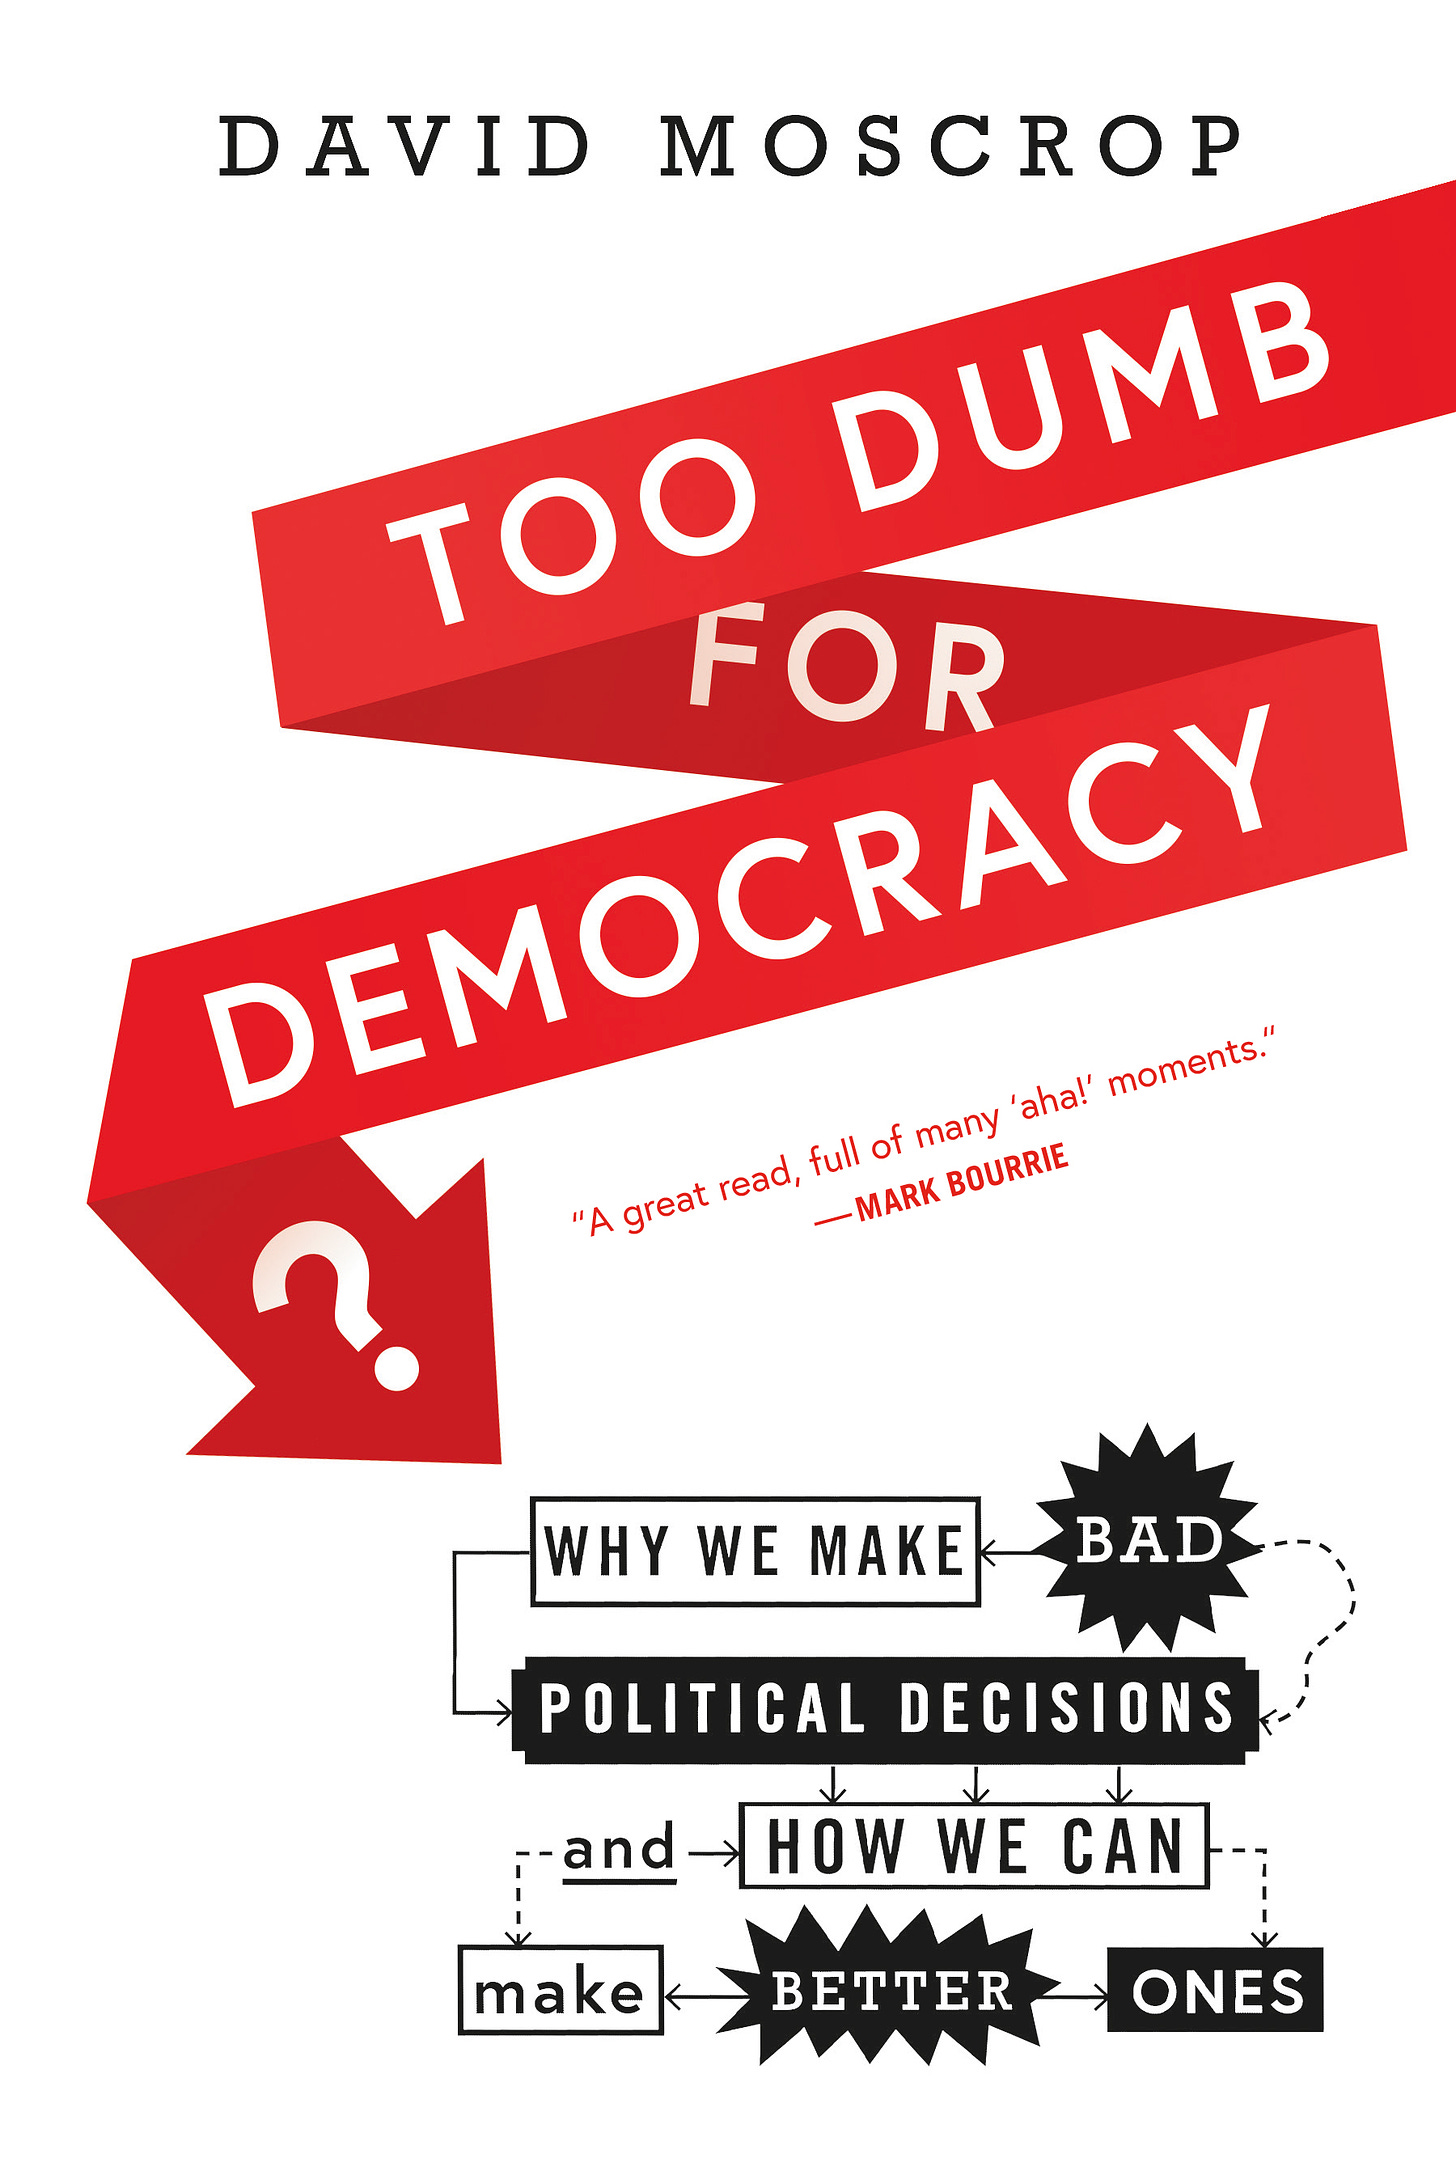 The book cover of Too Dumb for Democracy by David Moscrop. A white cover, with black text, and a red ribbon around the main title.